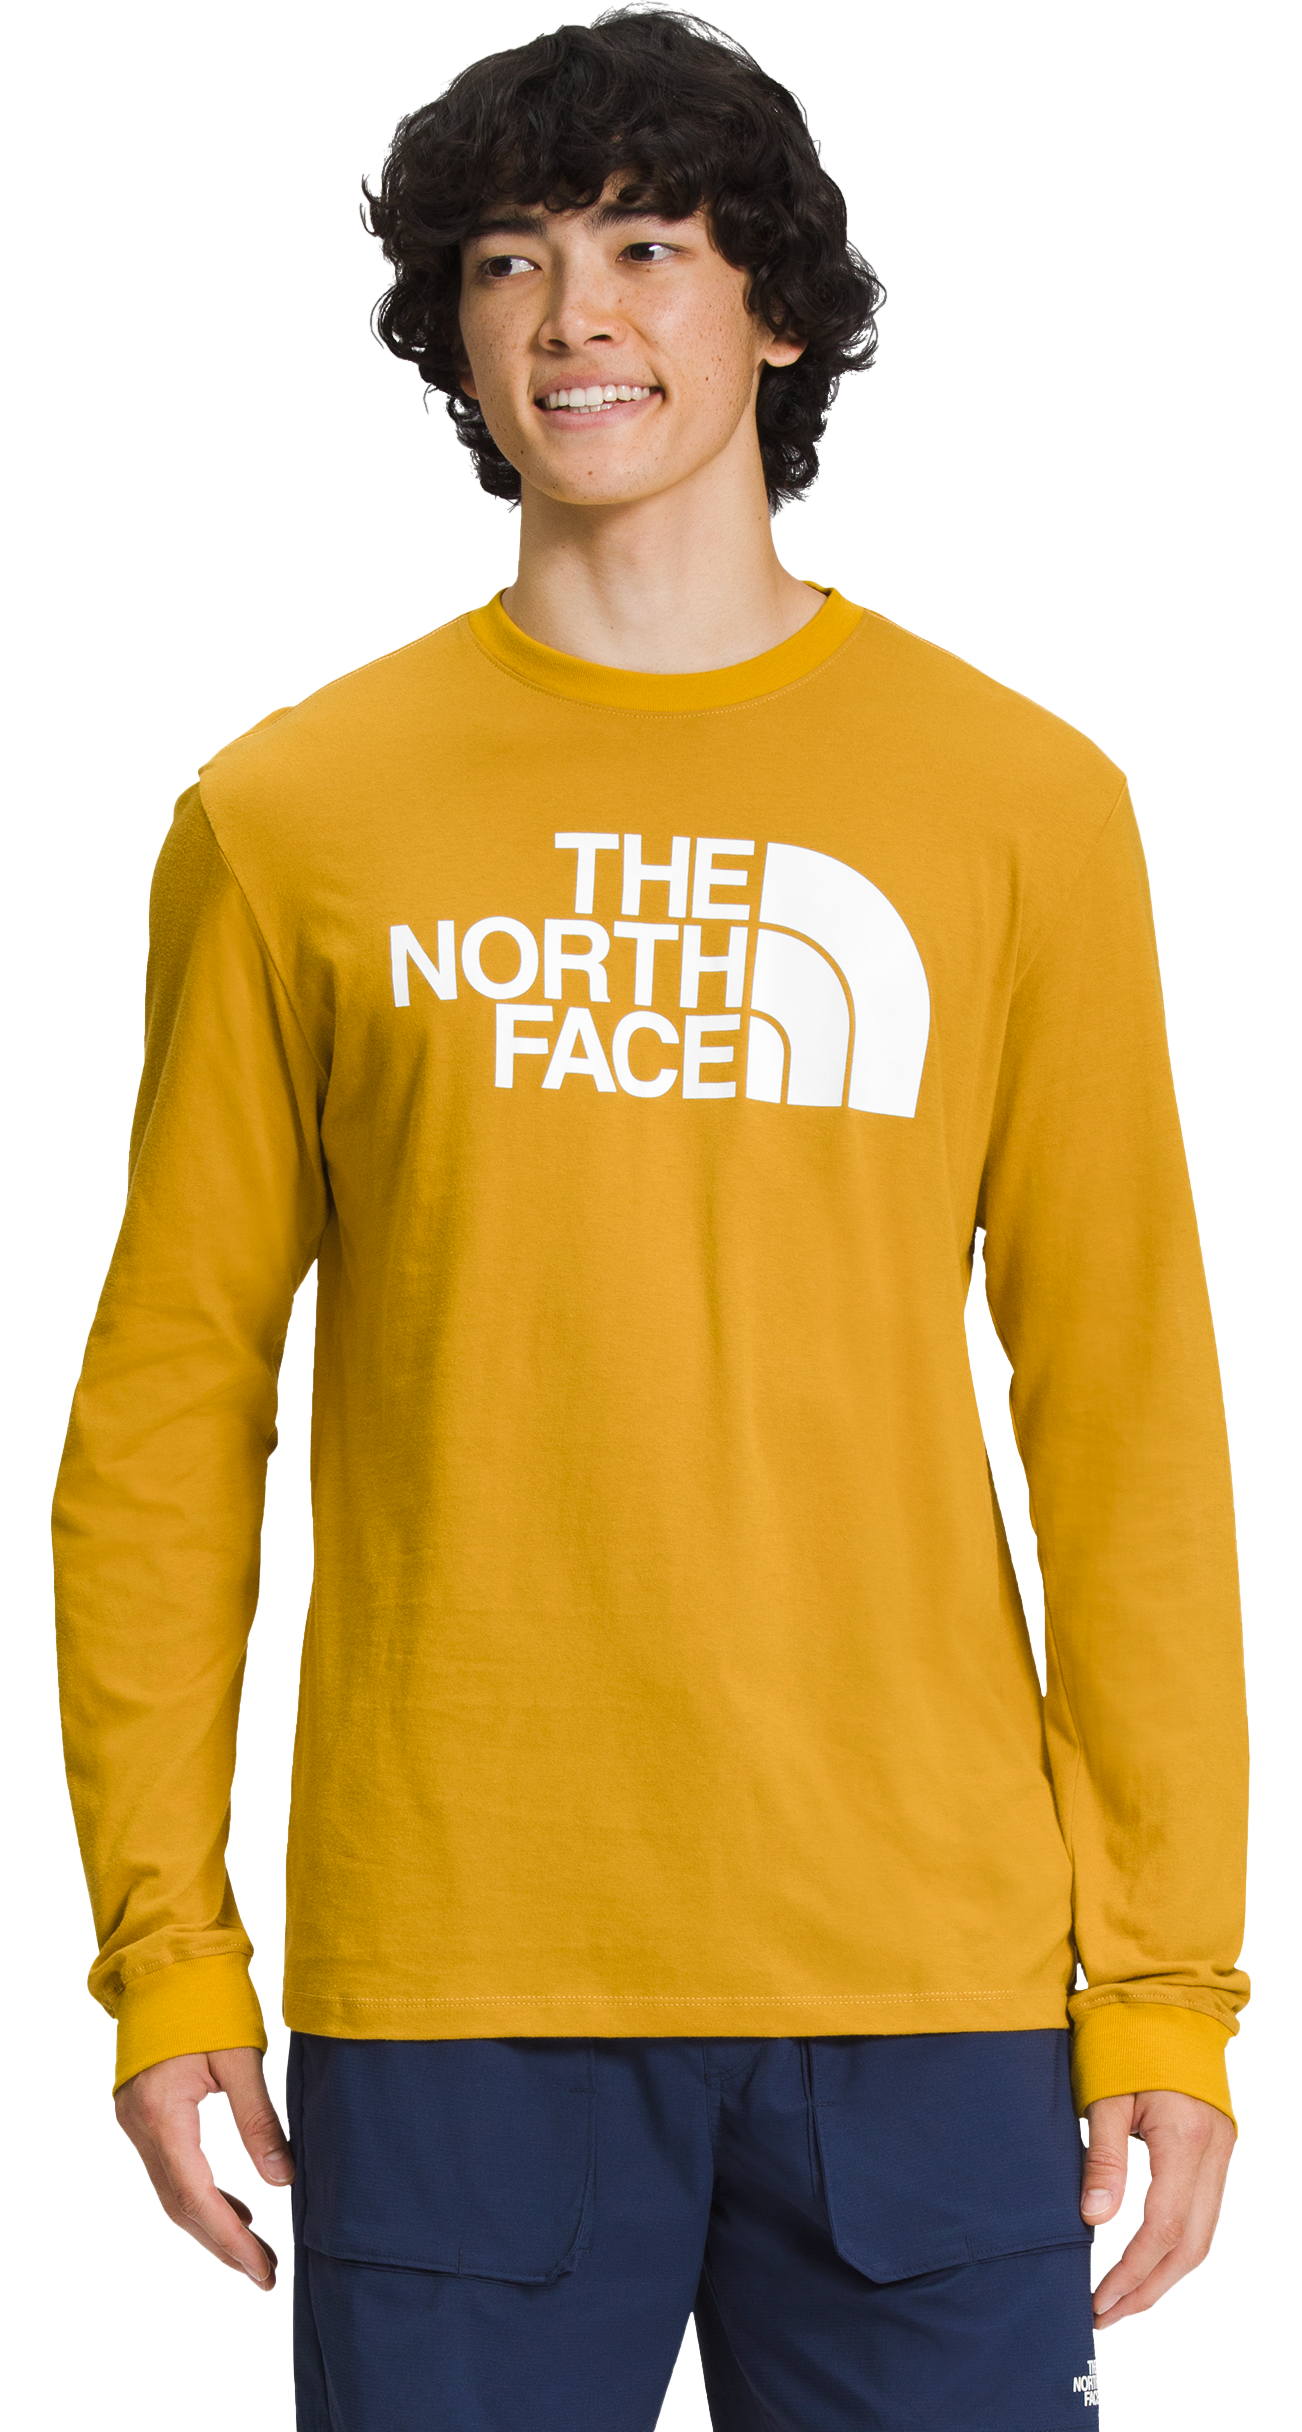 The North Face Half Dome Long-Sleeve T-Shirt for Men - Arrowwood Yellow/TNF White - S